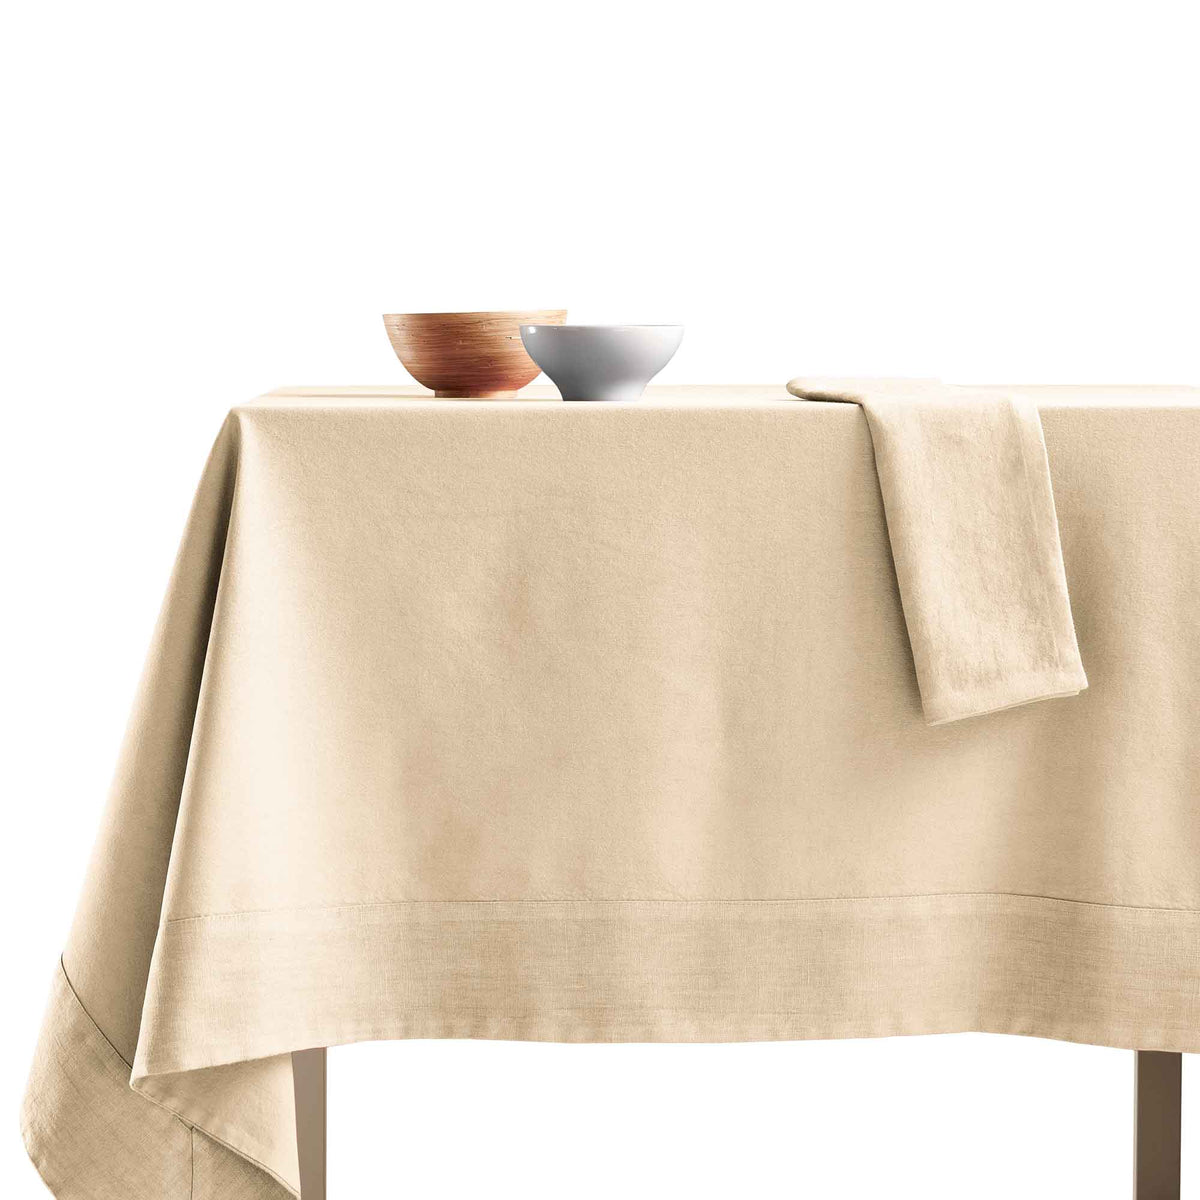 Tablecloth in Stonewashed Cotton with Linen Edge - Loira